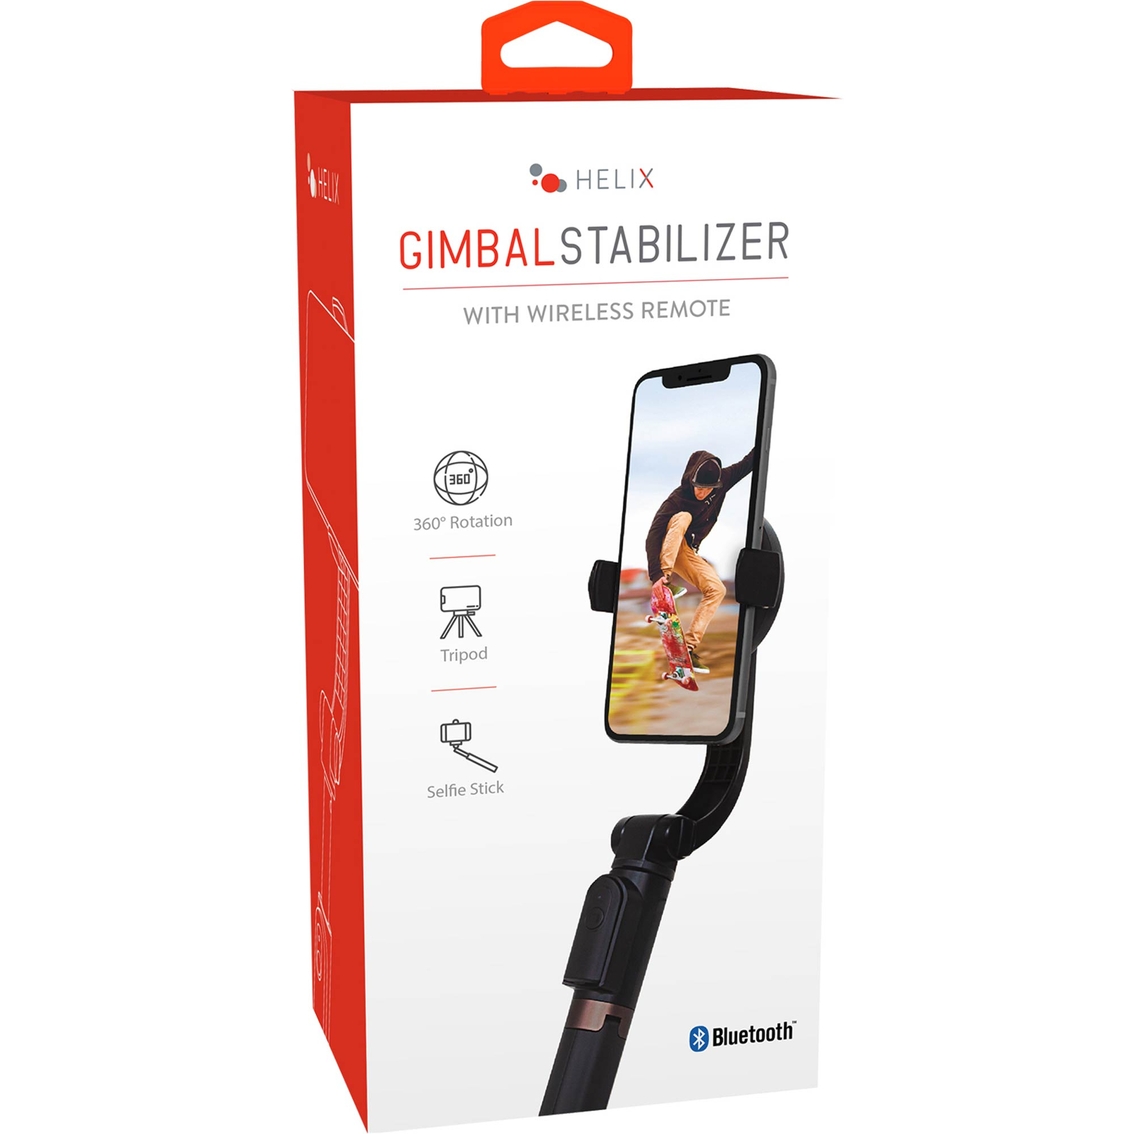 Helix Gimbal Stabilizer with Wireless Remote - Image 2 of 2